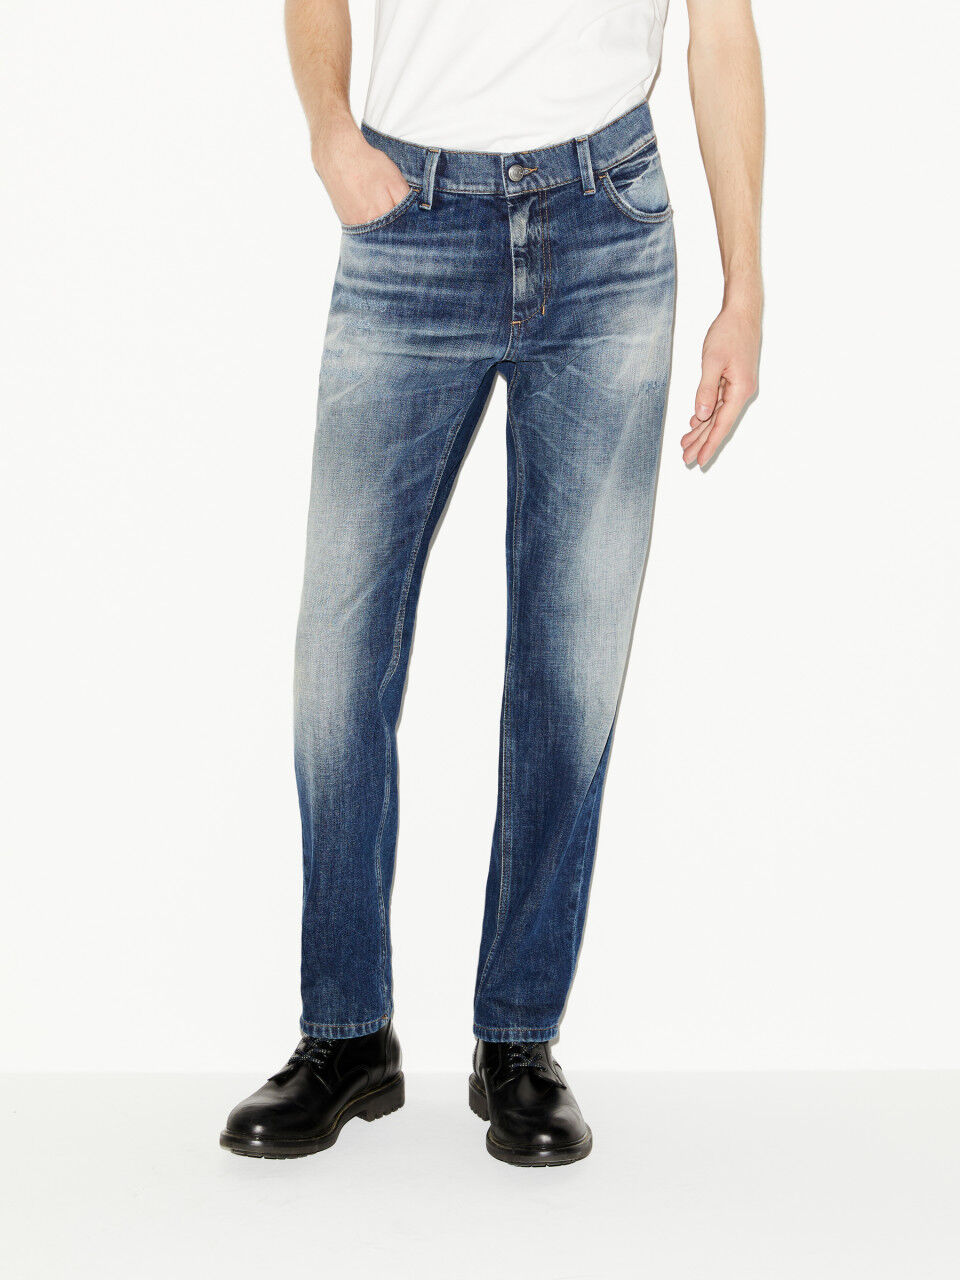 Slim fit Stockholm jeans with destroyed look